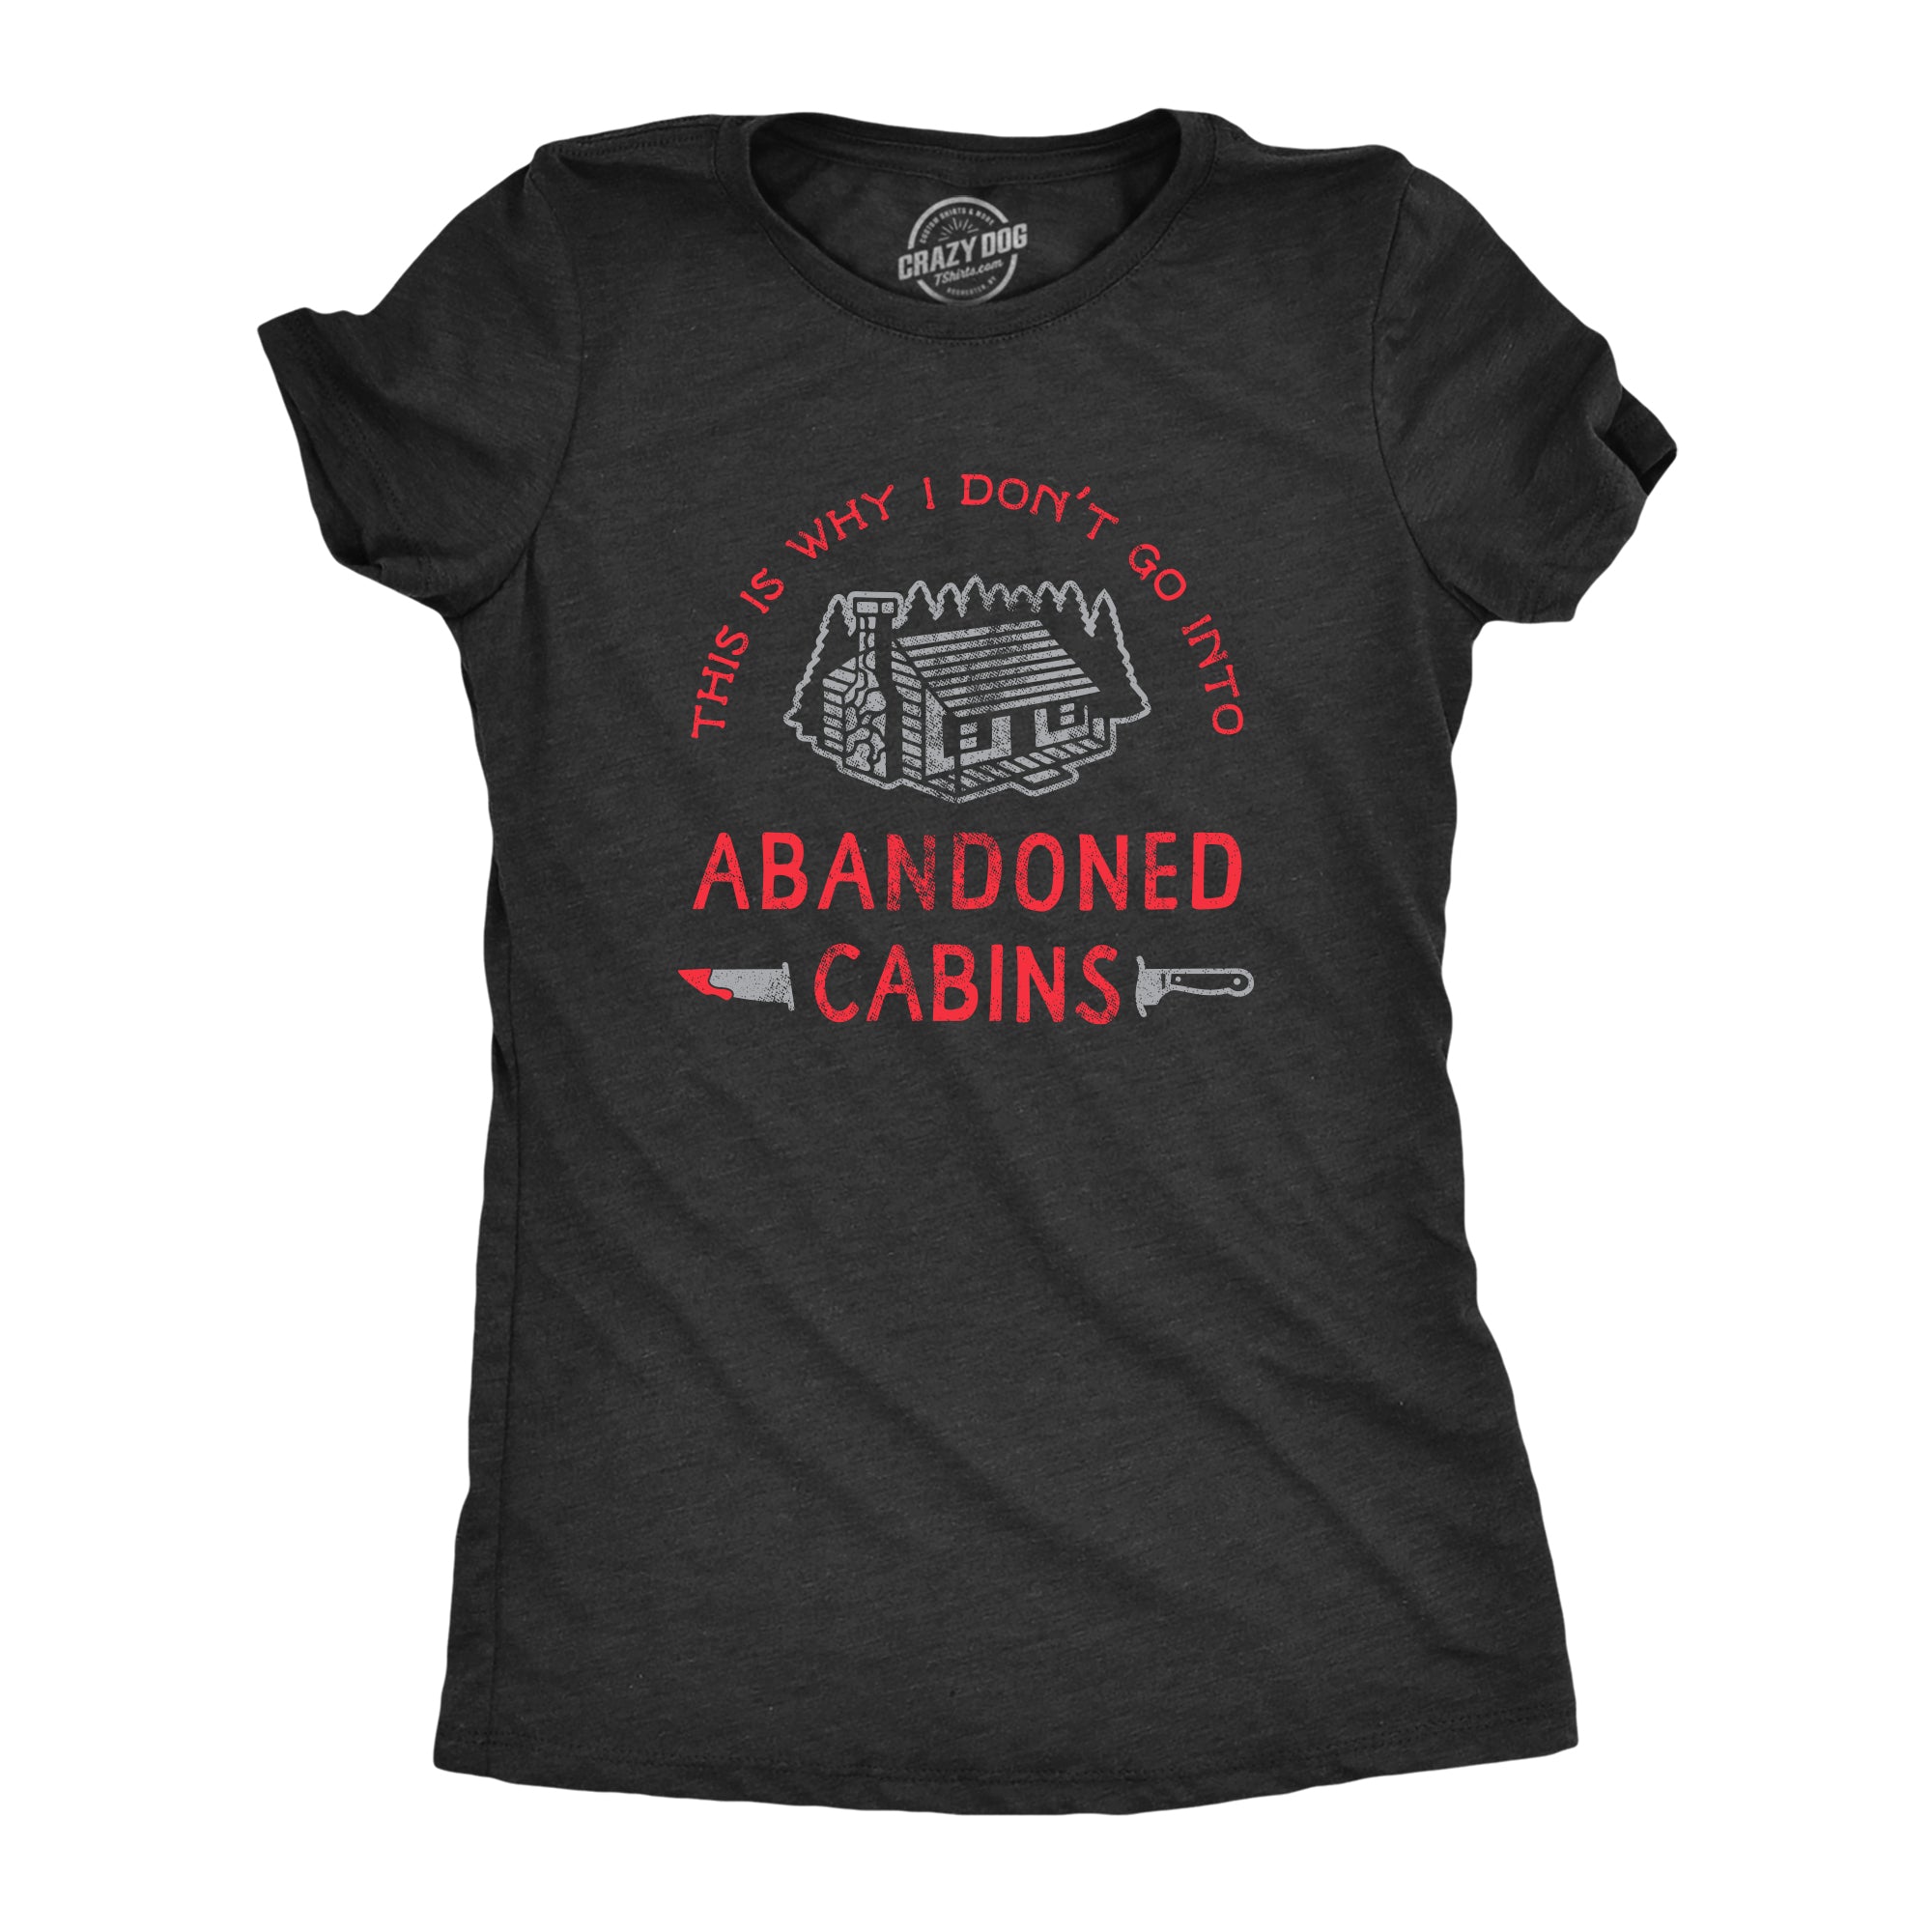 Funny Heather Black Why I Dont Go Into Abandoned Cabins Womens T Shirt Nerdy Halloween TV & Movies Sarcastic Tee